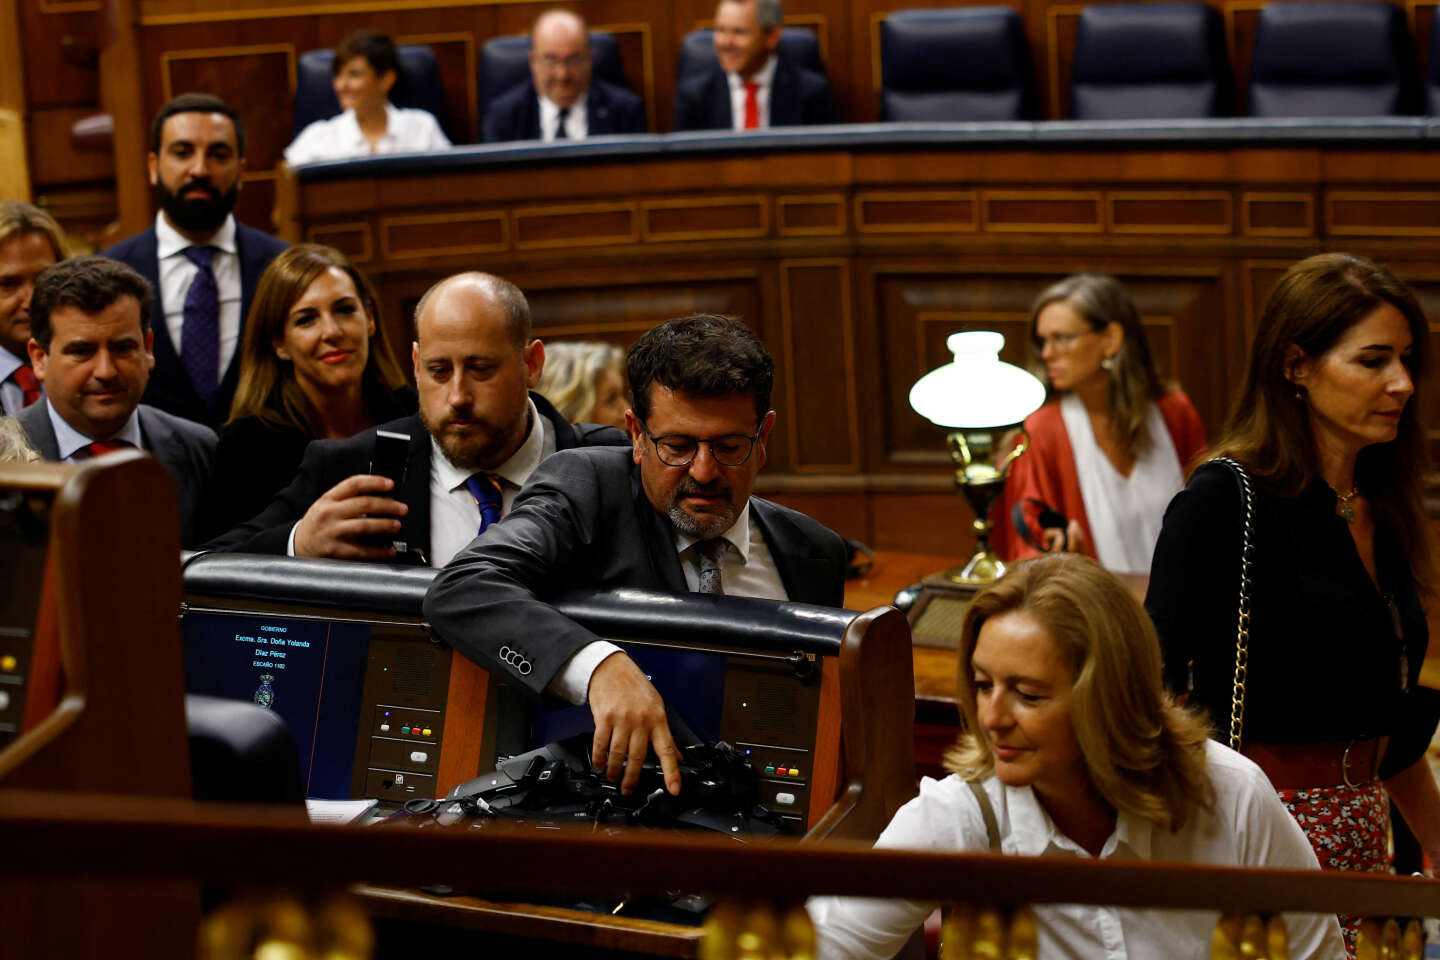 tensions in the Spanish Parliament over the use of Catalan, Basque and Galician